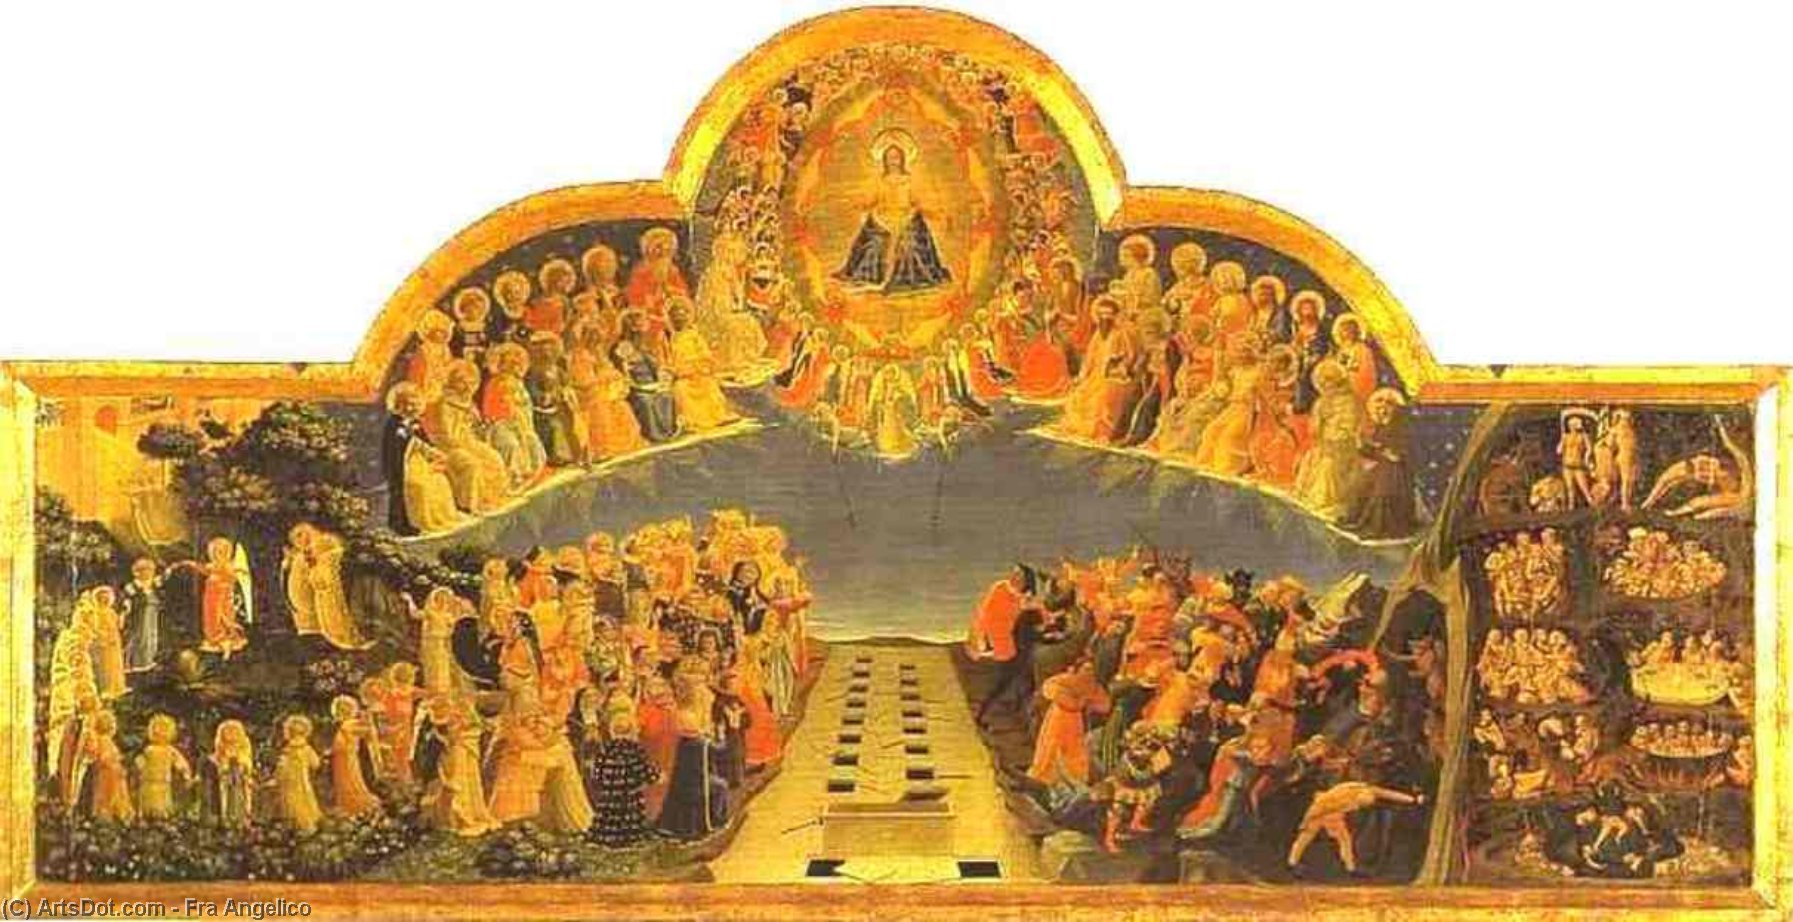 WikiOO.org - 백과 사전 - 회화, 삽화 Fra Angelico - The Last Judgement.